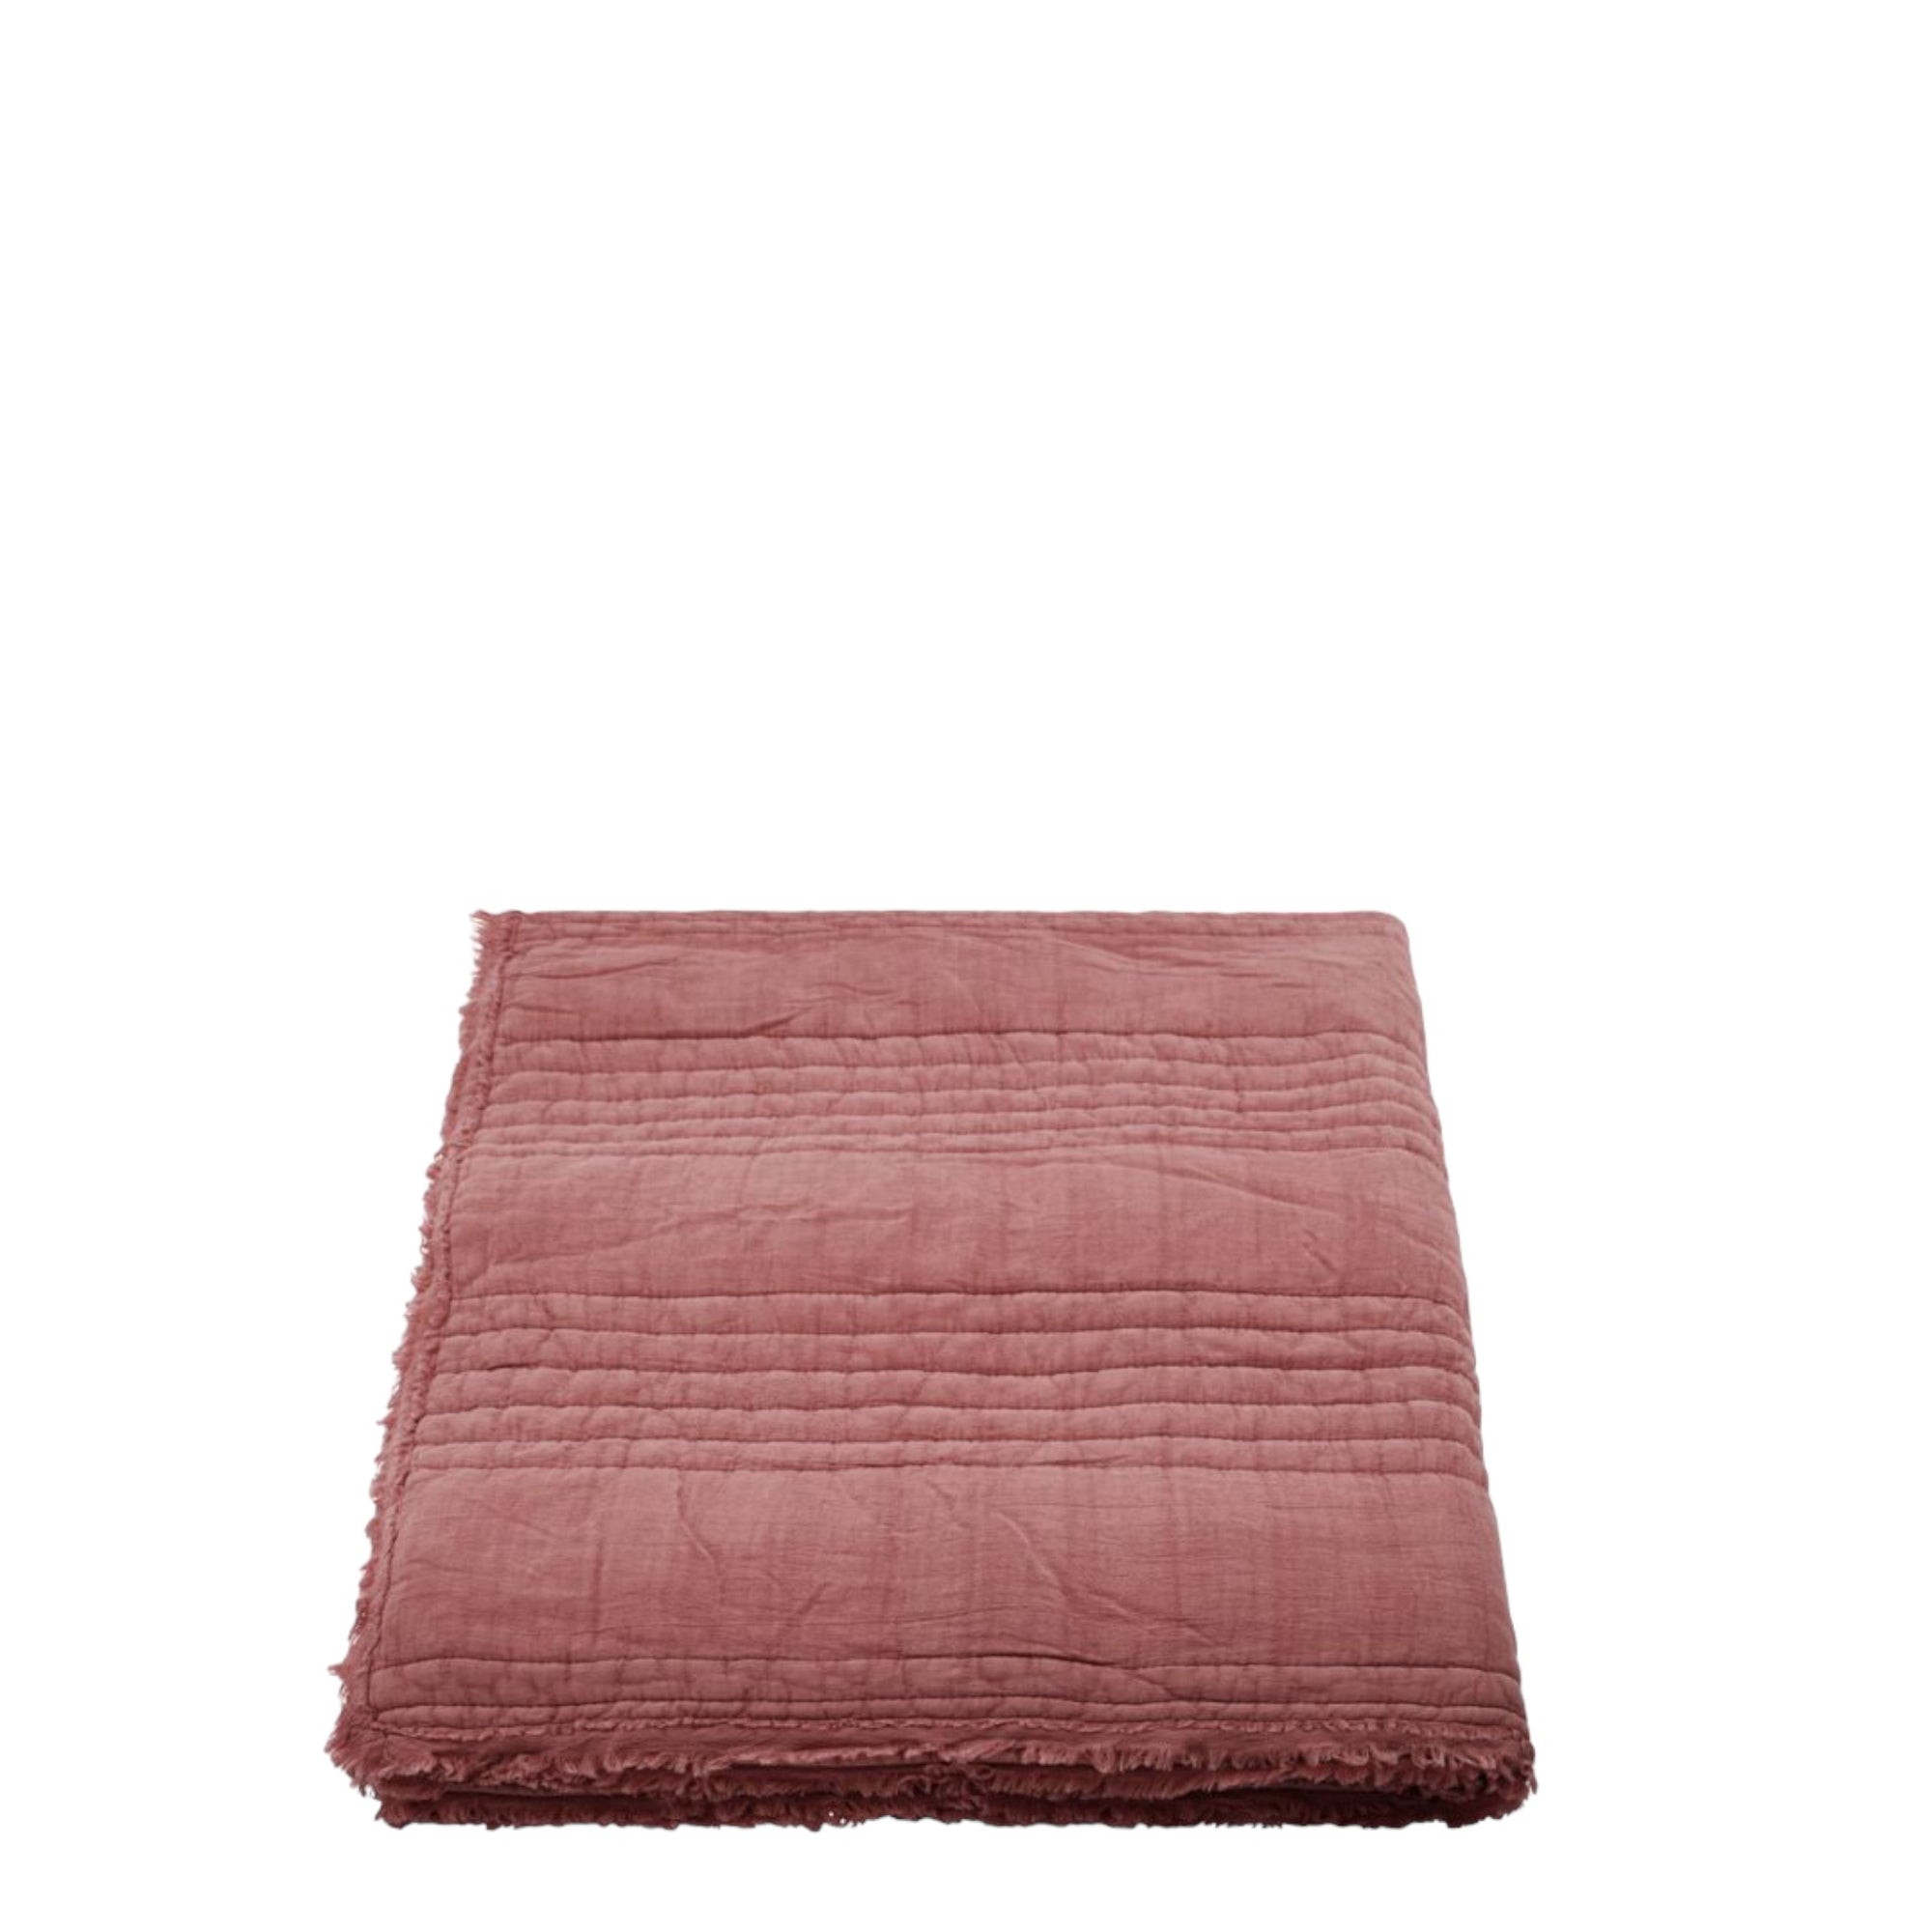 Quilt RUFFLE Dusty Berry